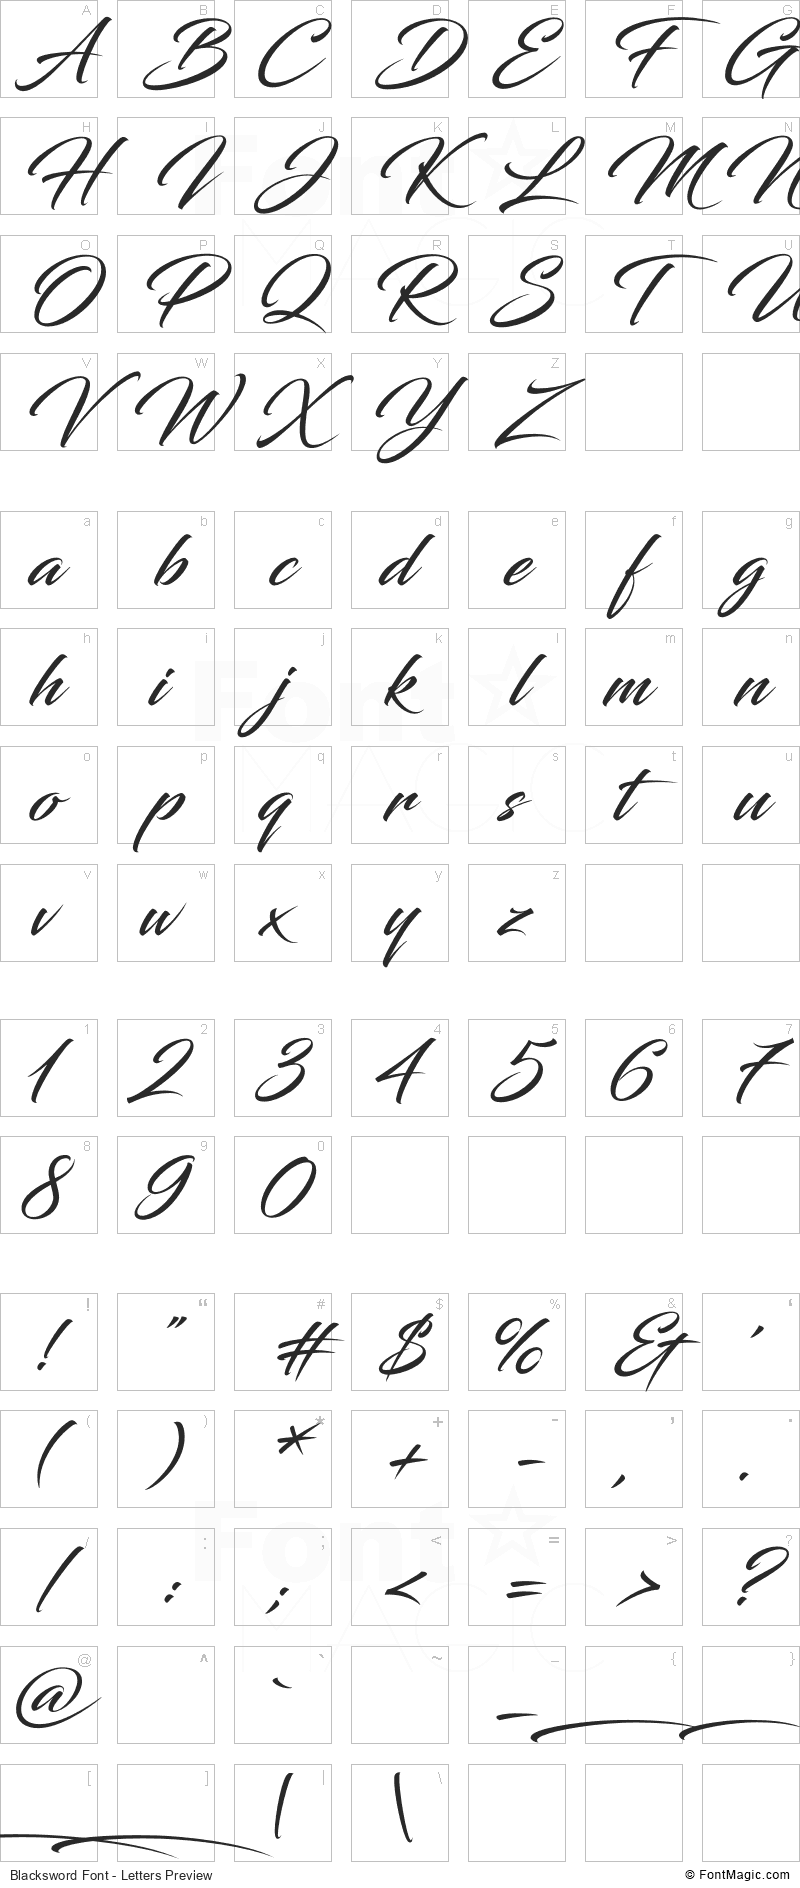 Blacksword Font - All Latters Preview Chart